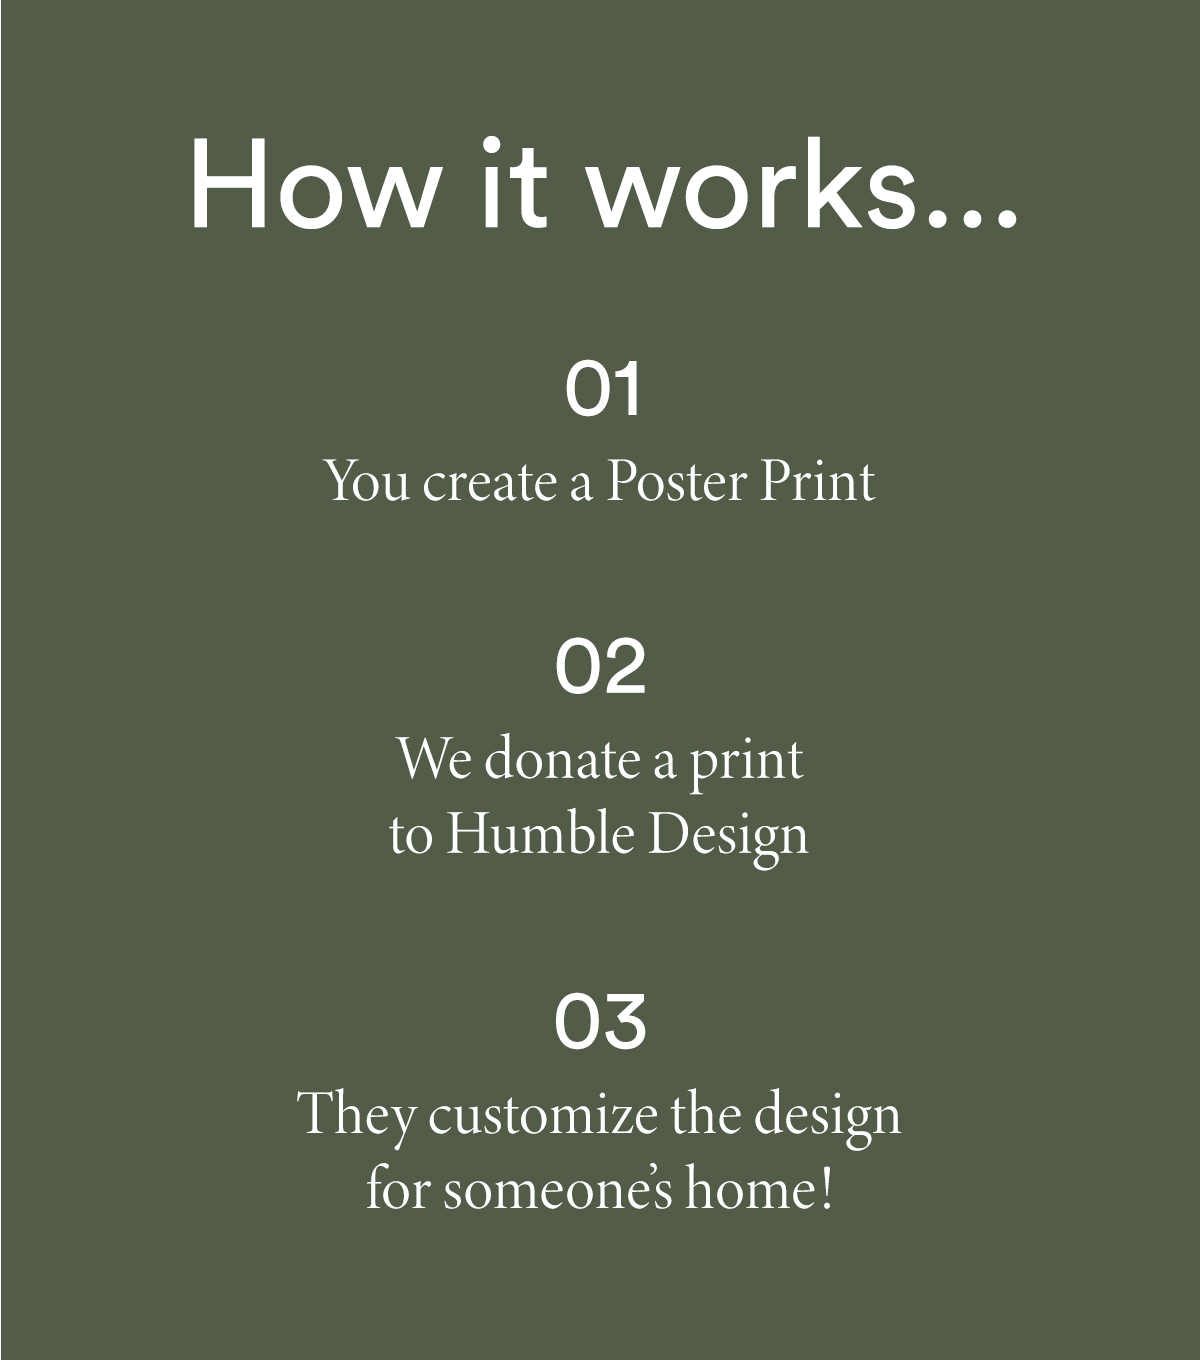 instructions noting to create a poster print and Artifact Uprising will donate one for Humble Design to customize for a family